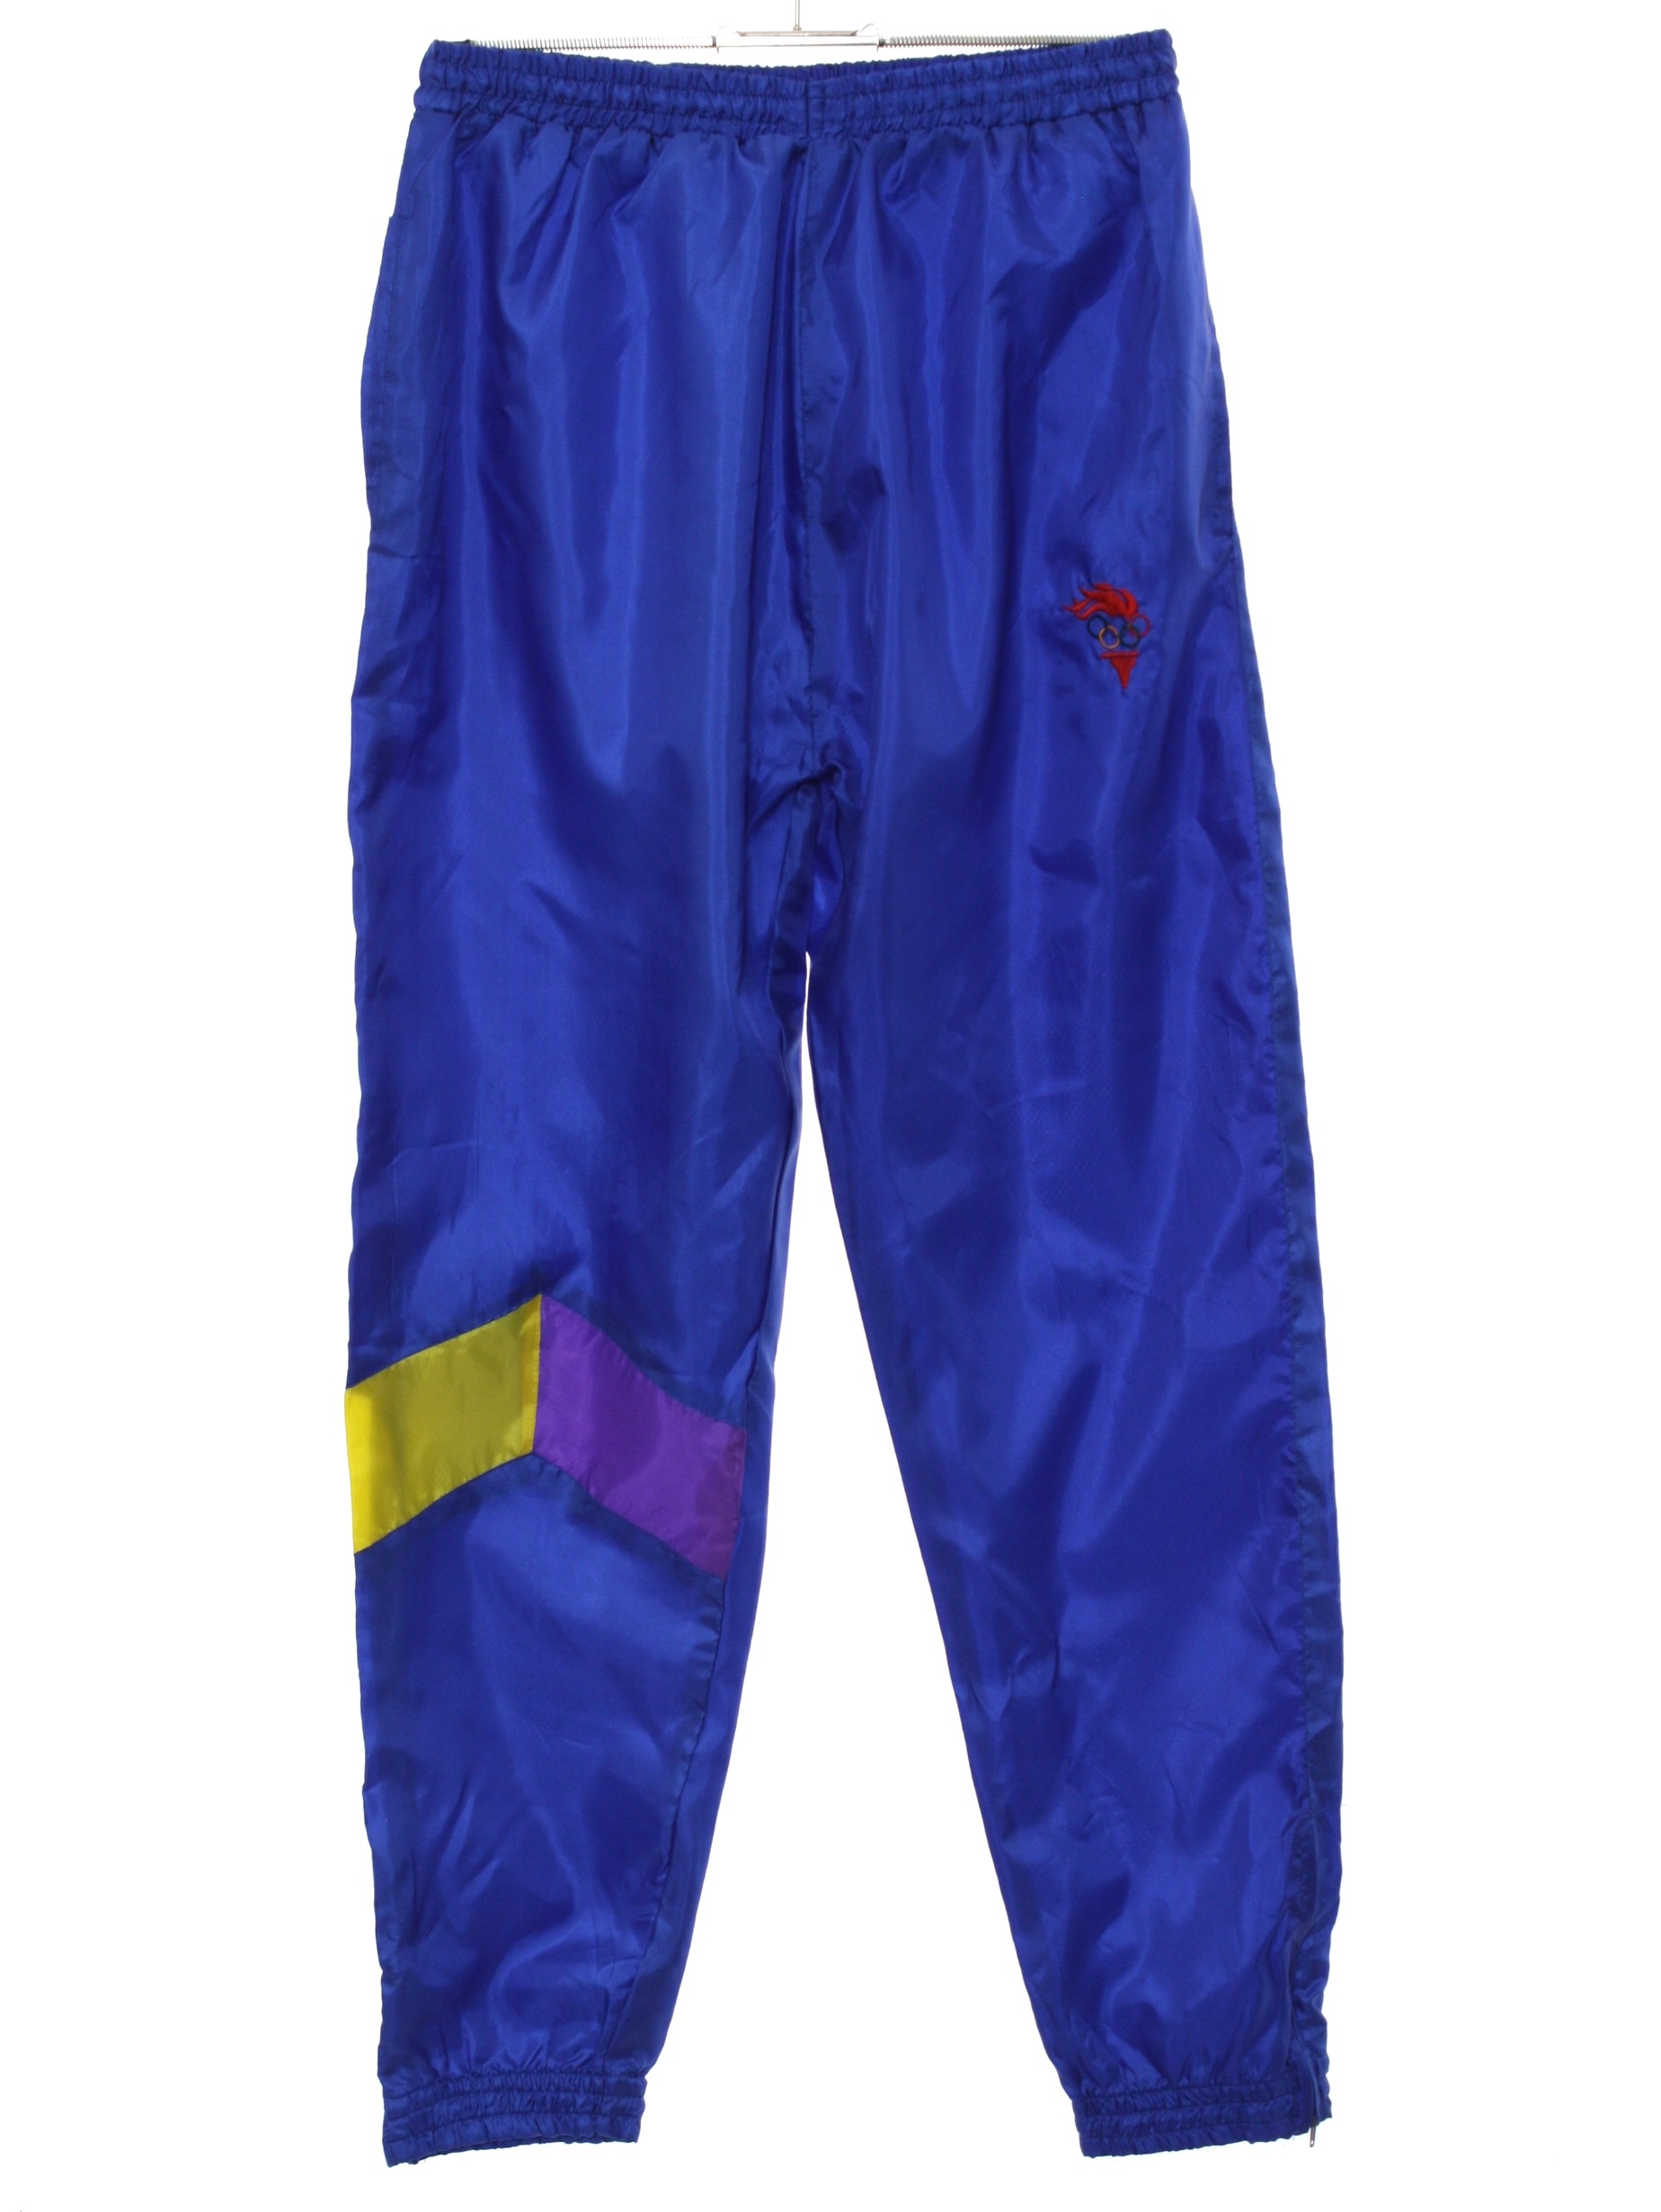 Pants: 90s -Missing Label- Mens shiny royal blue solid colored nylon ...